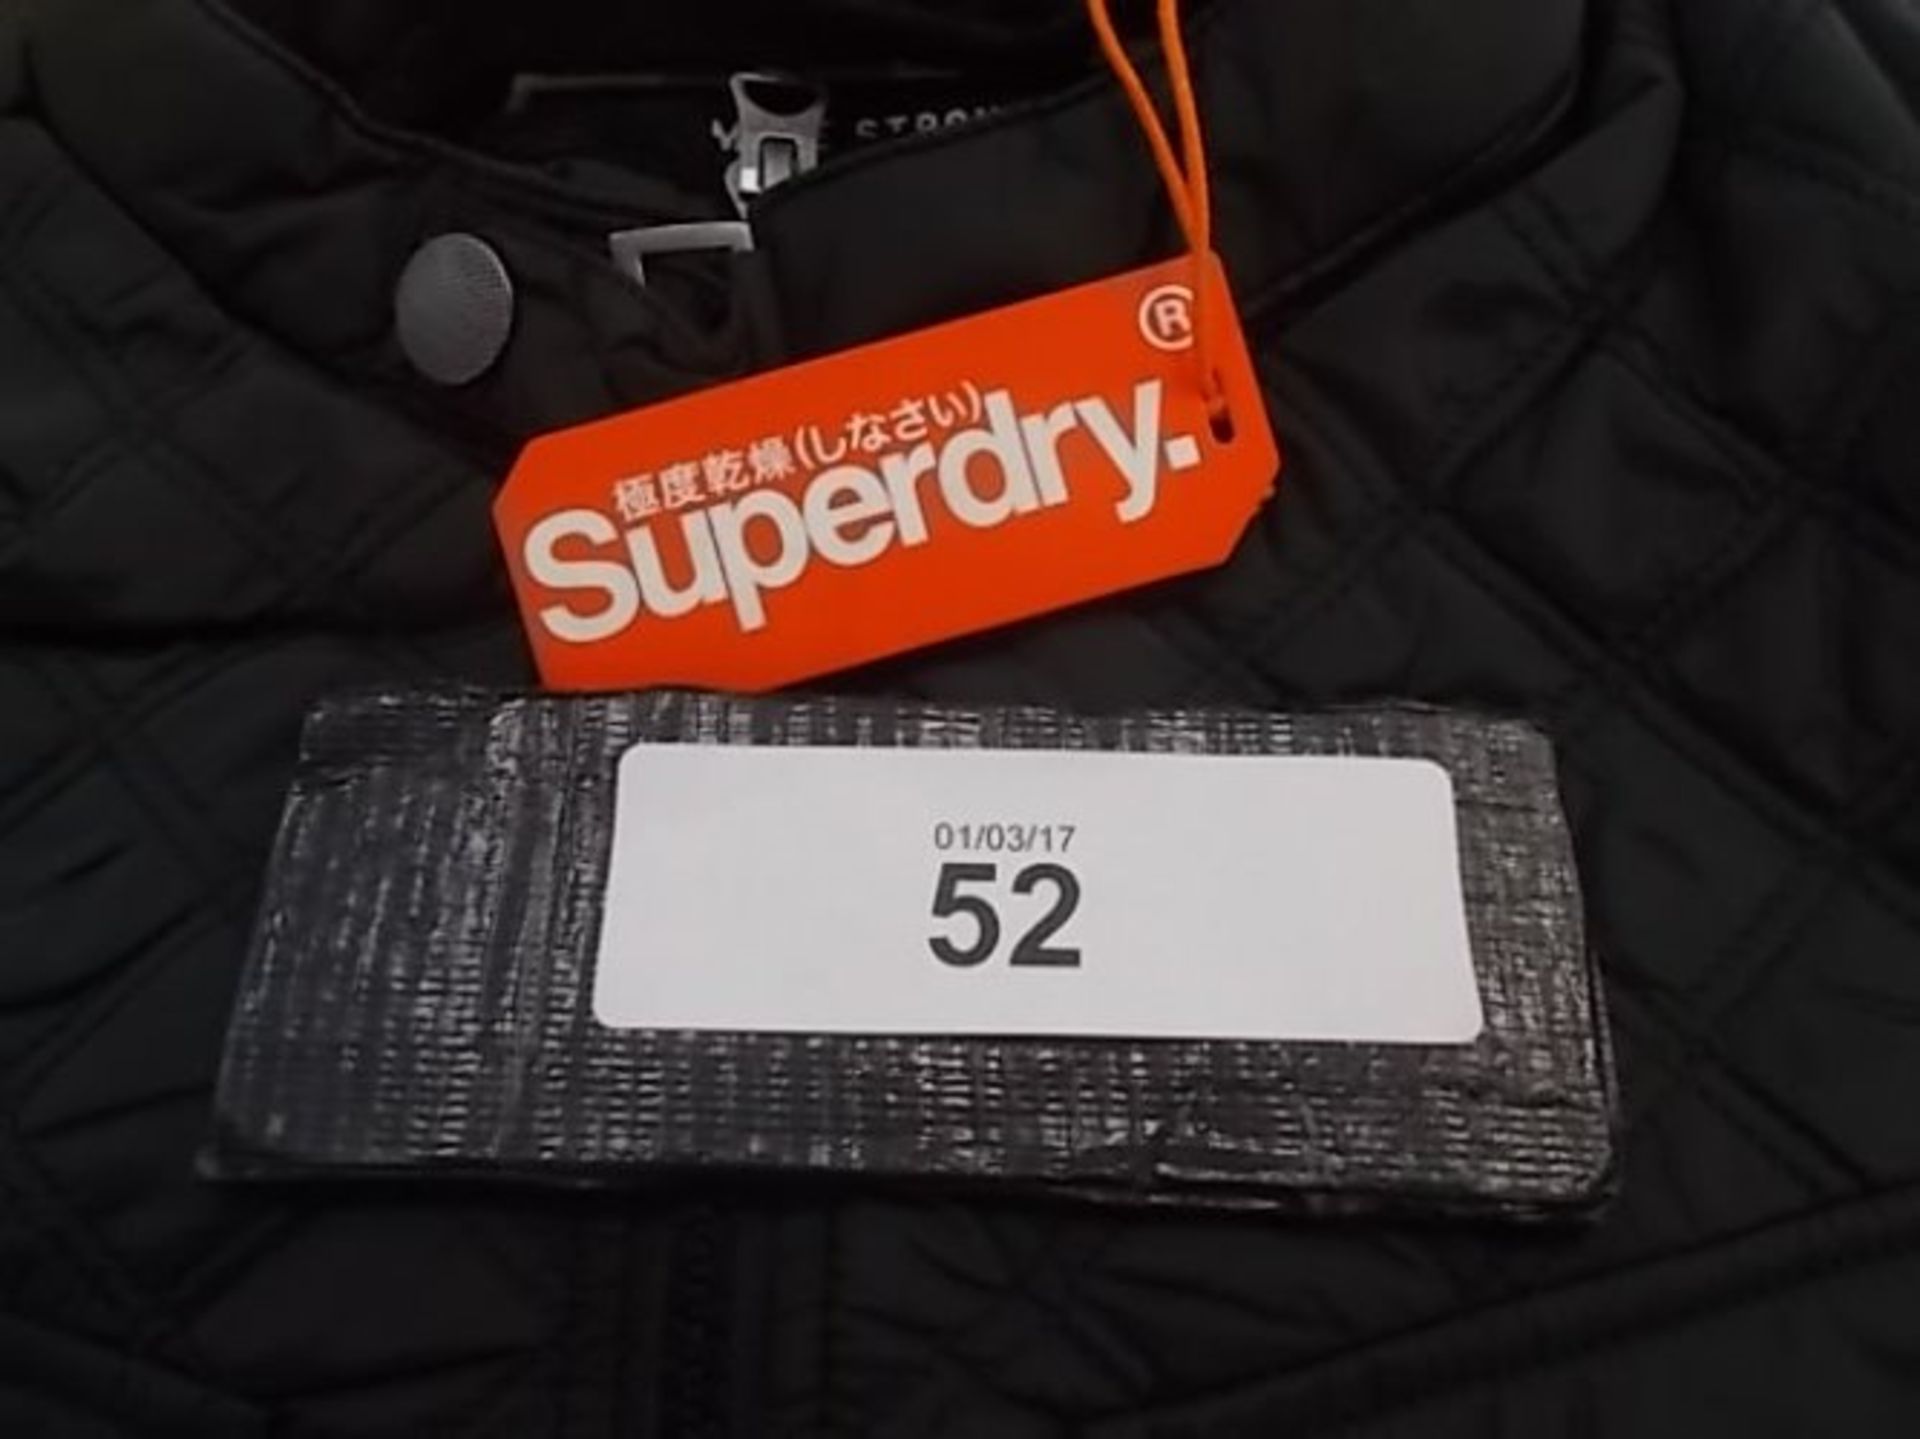 1 x men's branded coats/jackets comprising Superdry Apex Norse Jacket quilted black jacket, size ~ - Image 3 of 3